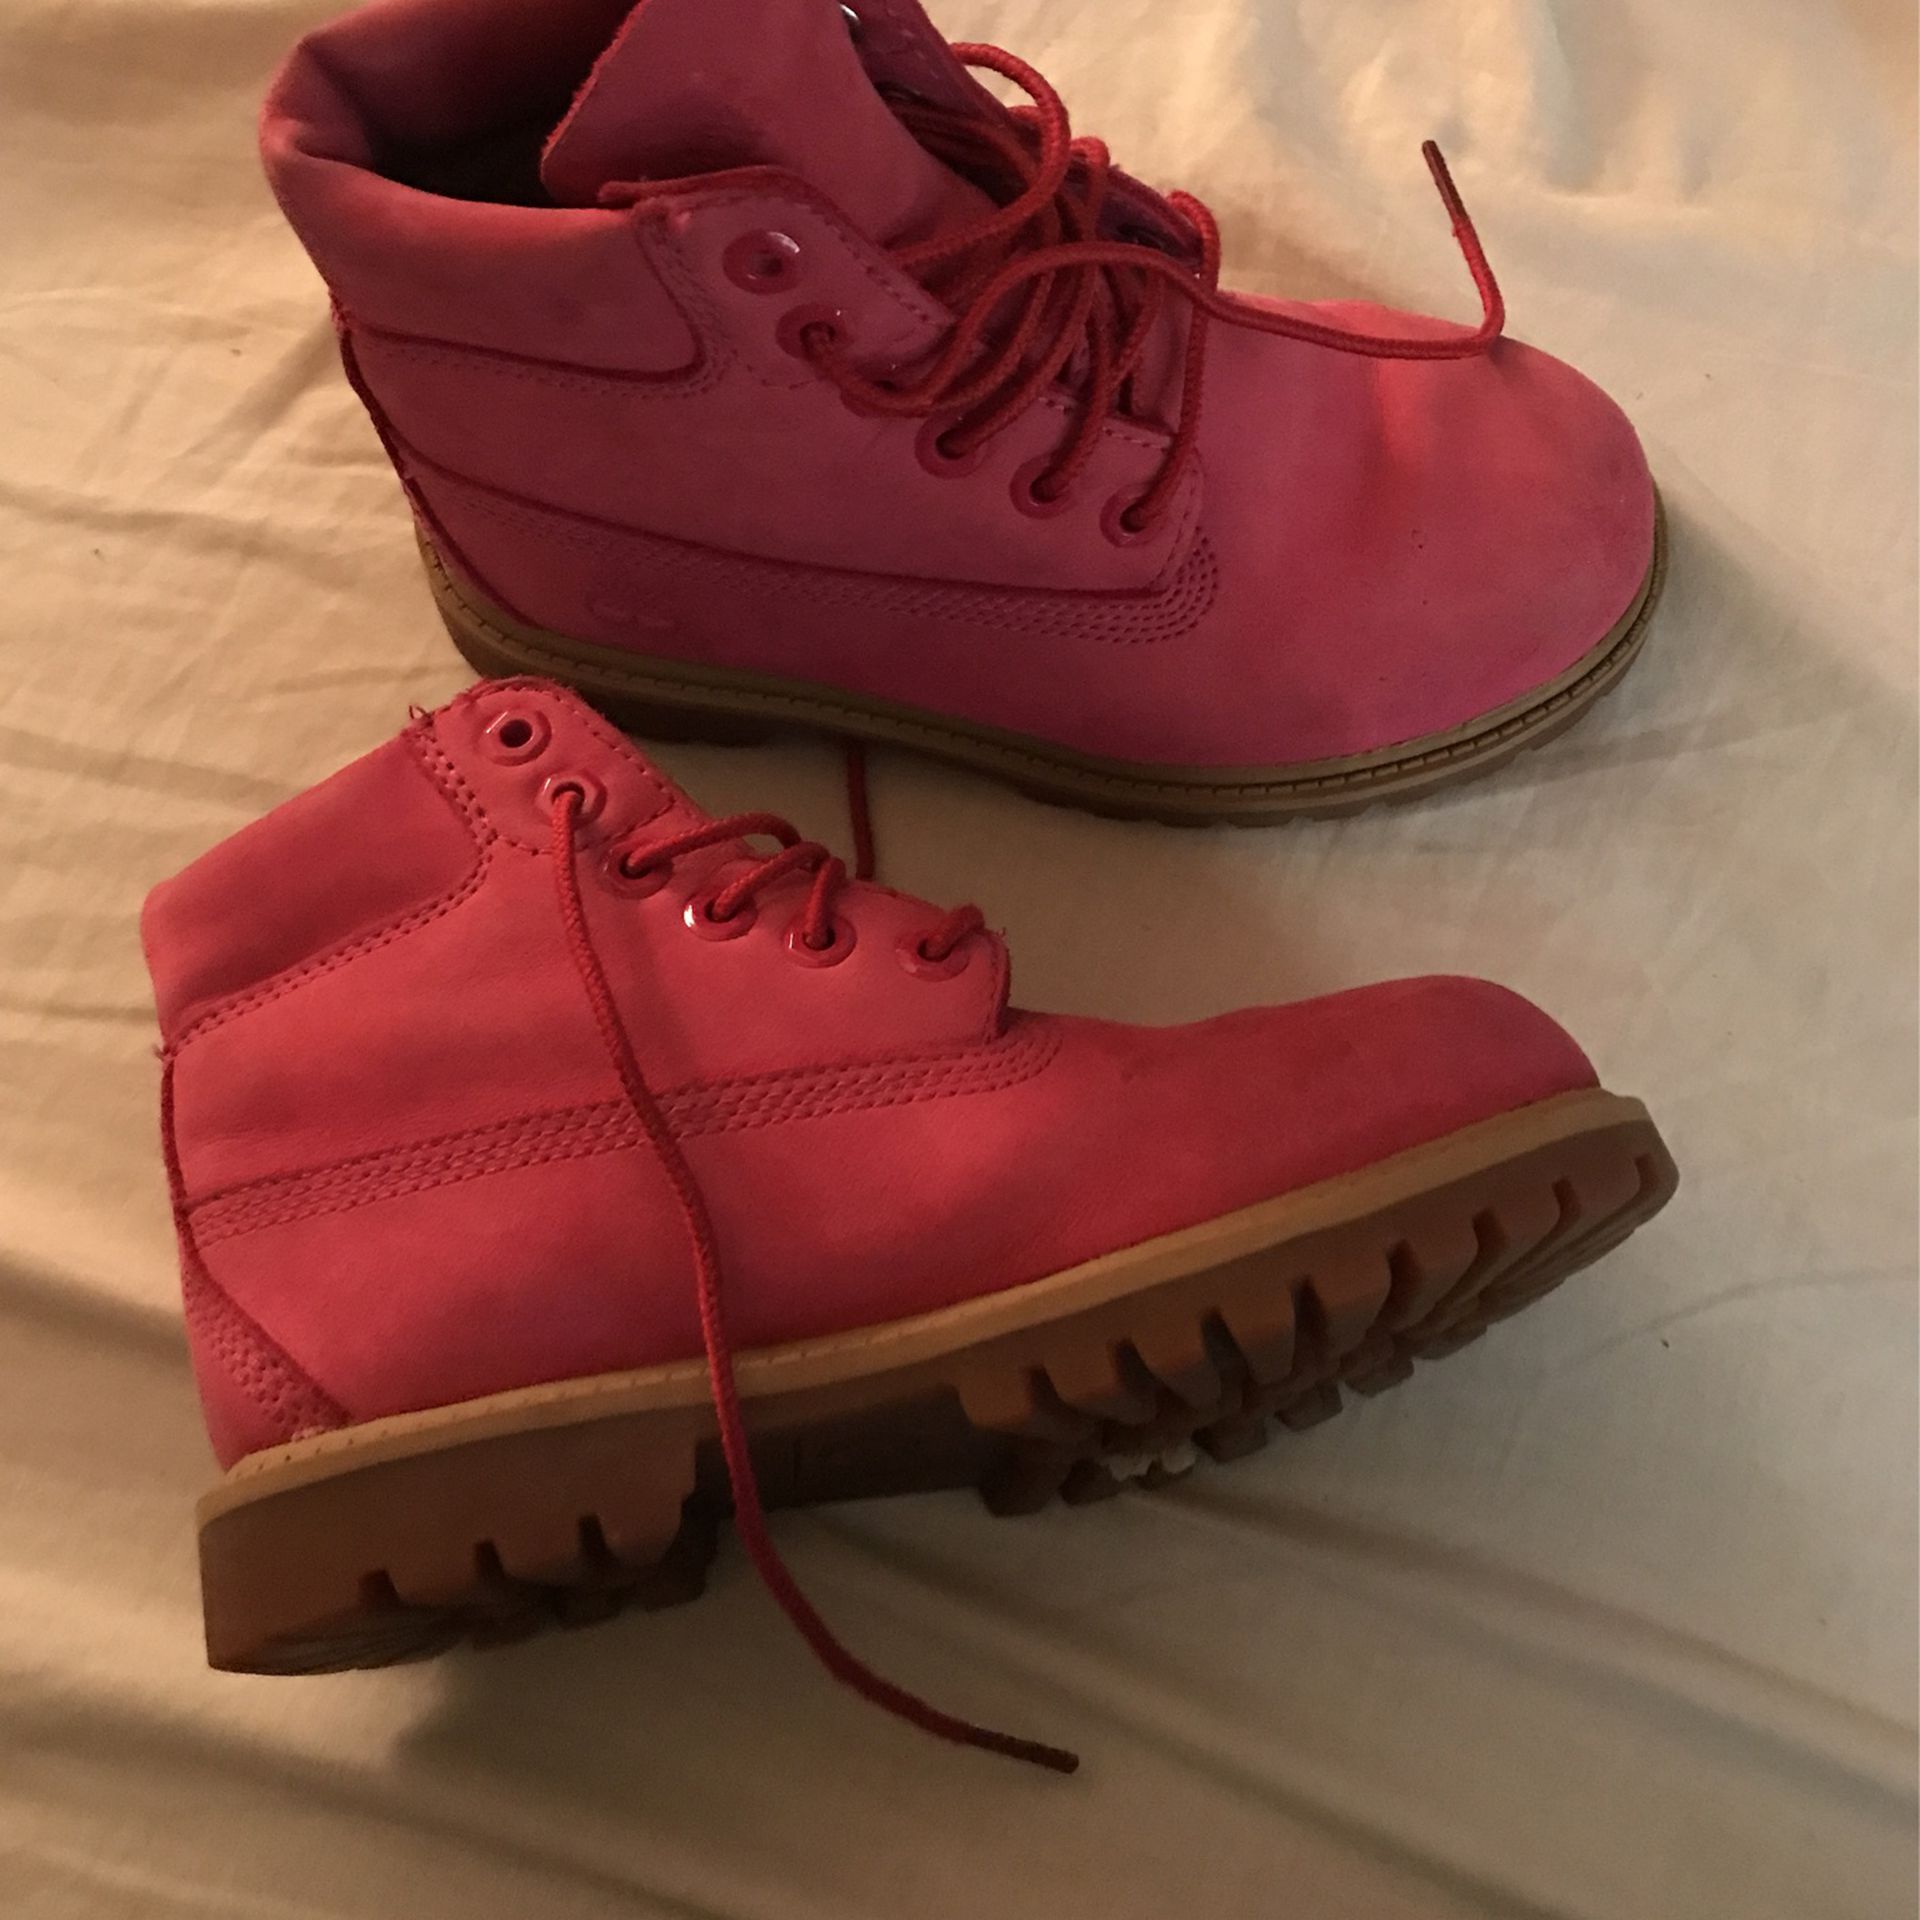 Pink Timberland Boots 13c